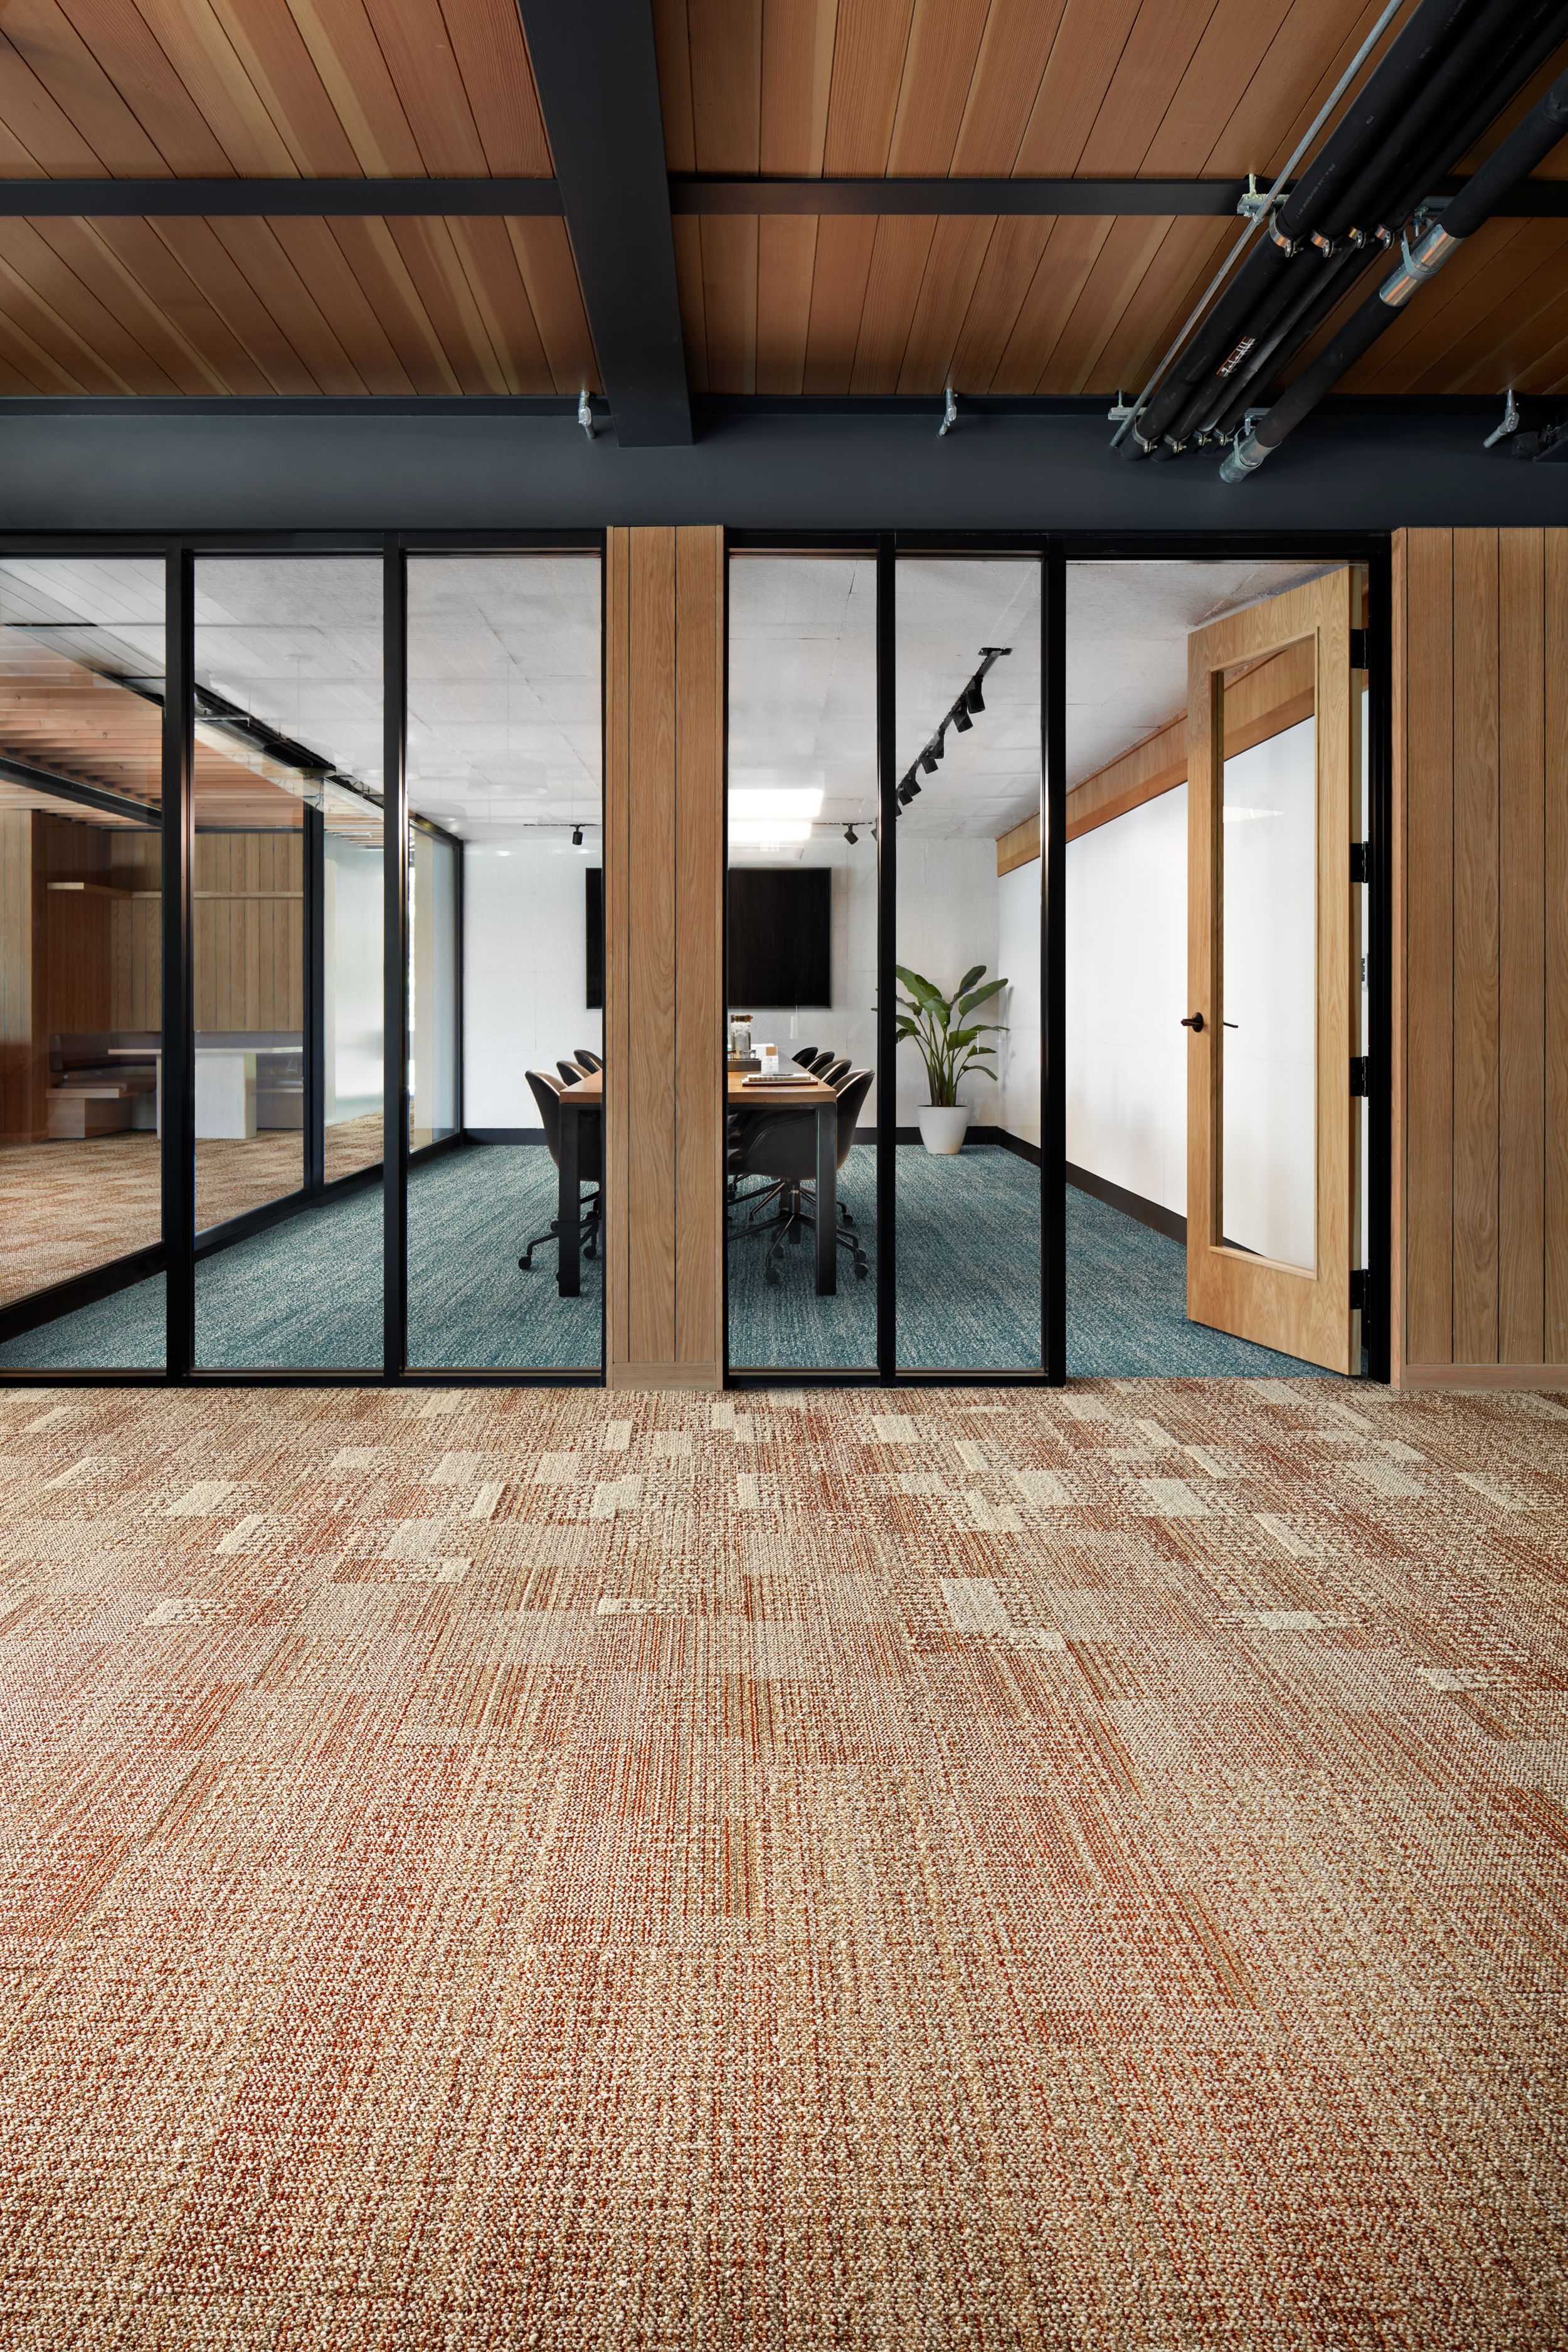 Interface Dot 2 Dot, Dot O-Mine and Diddley Dot plank carpet tile in meeting room image number 5